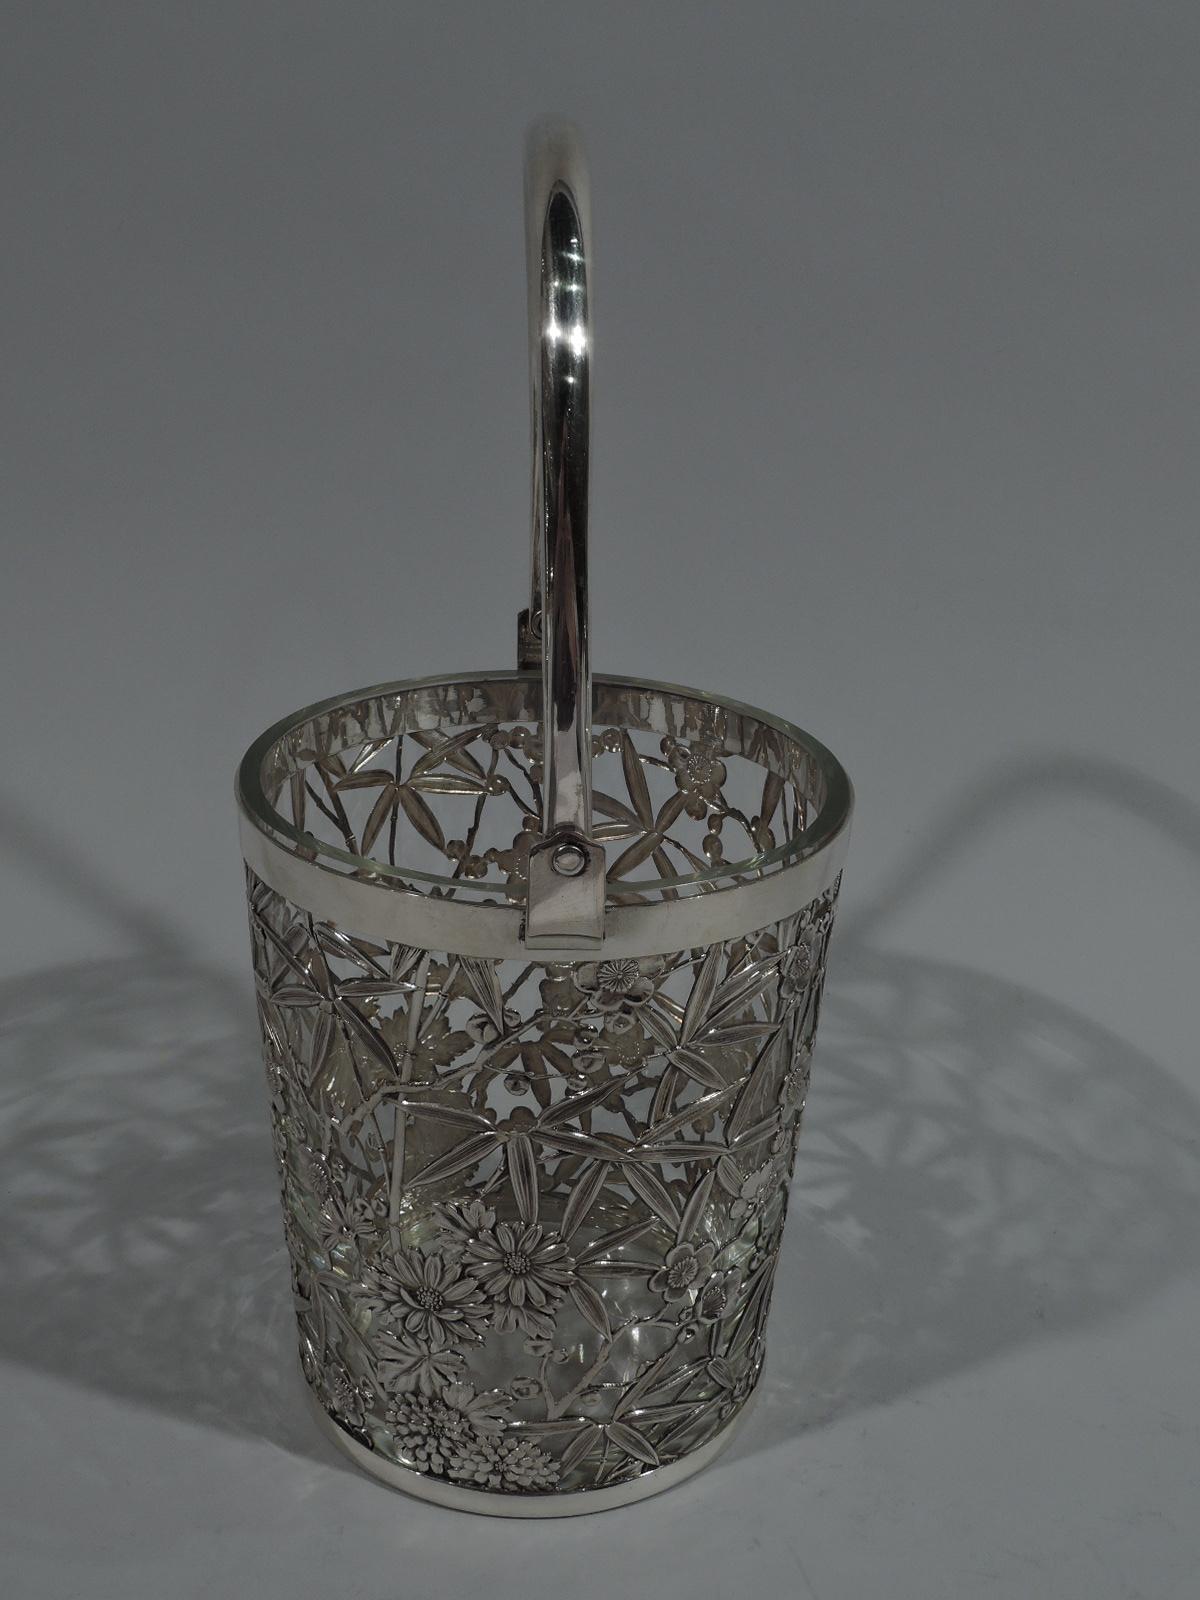 Japanese silver ice bucket. Round with straight sides and plain rim and vase. Loose floral openwork on sides with pell-mell blossoms interspersed with bamboo leaves. C-scroll swing handle. Detachable clear glass liner. Marked “Sterling 950”.